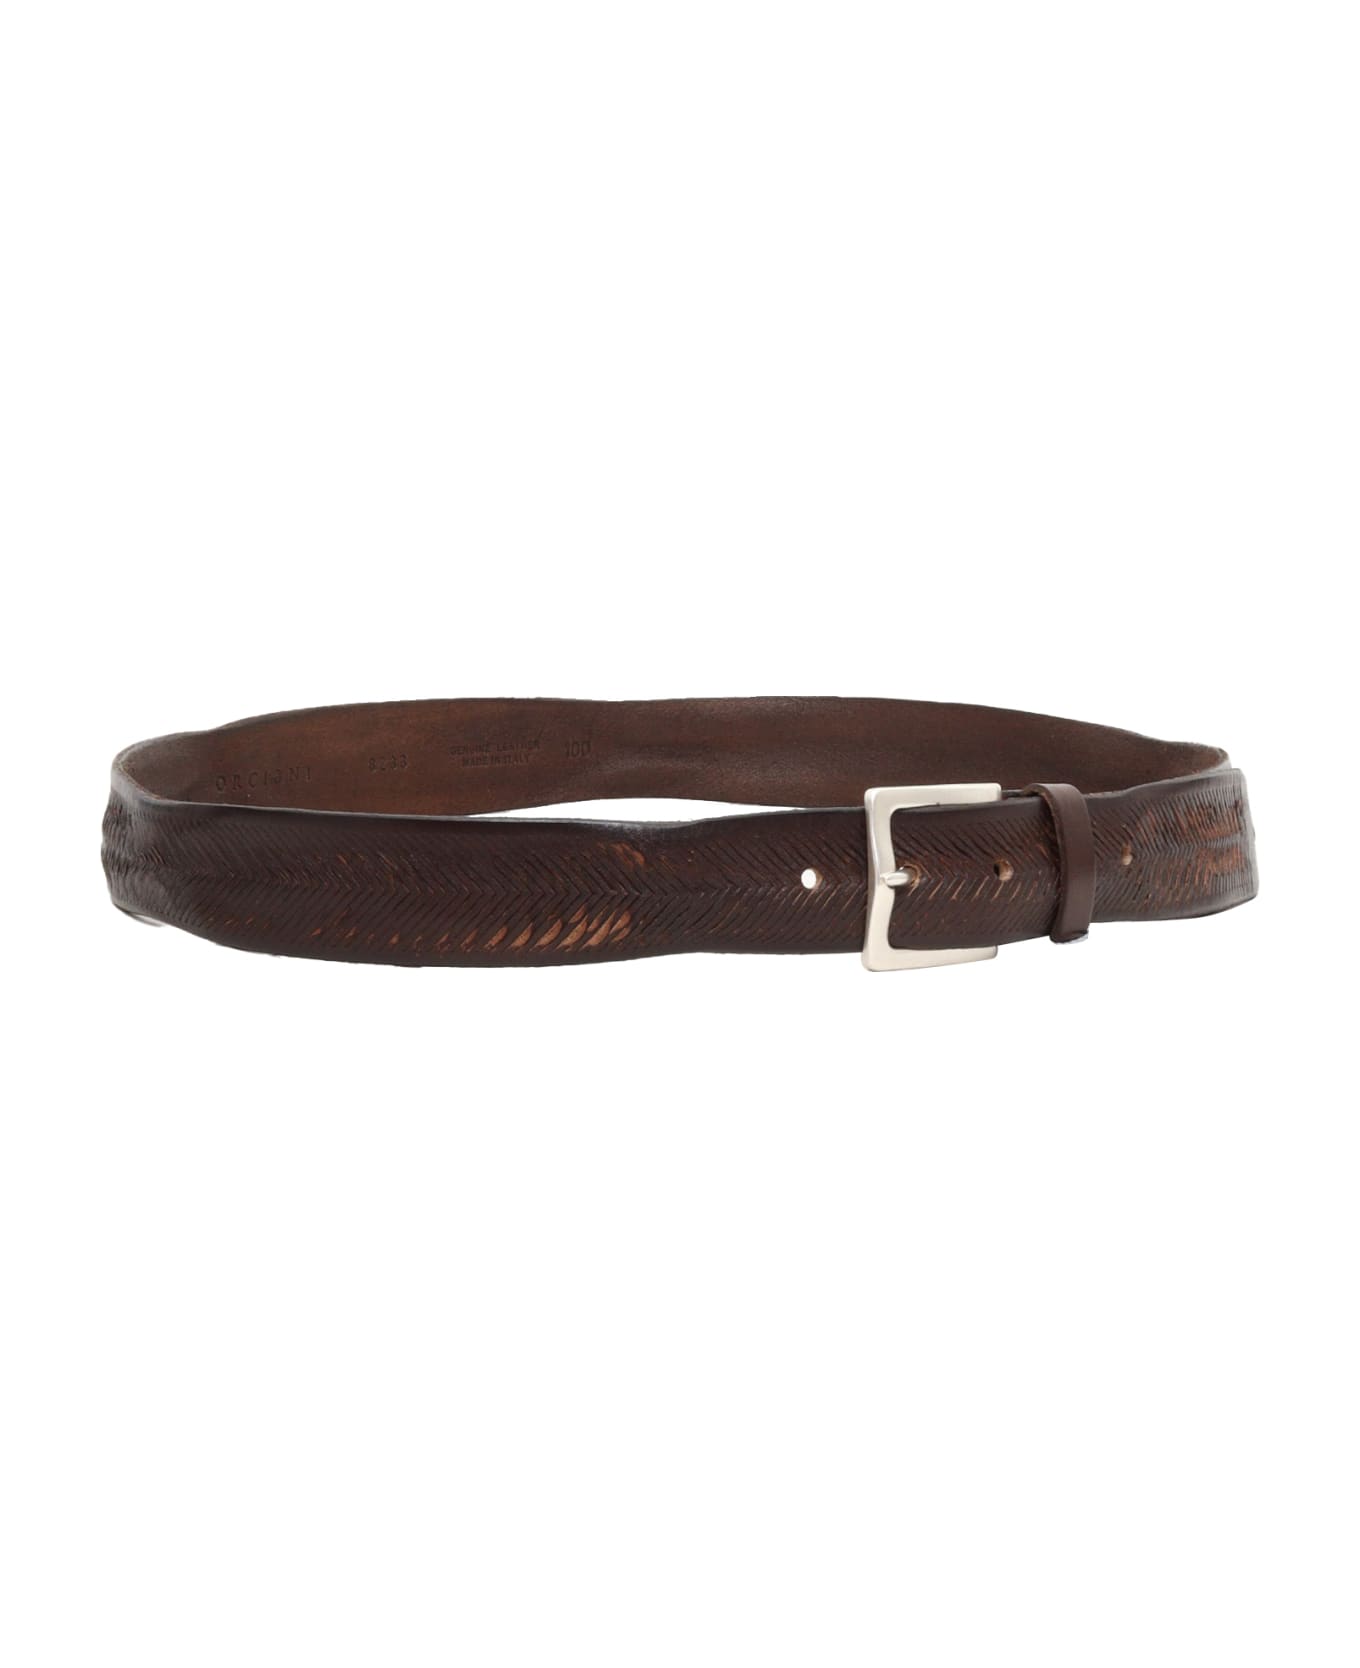 Orciani Carved Brown Belt - BROWN ベルト